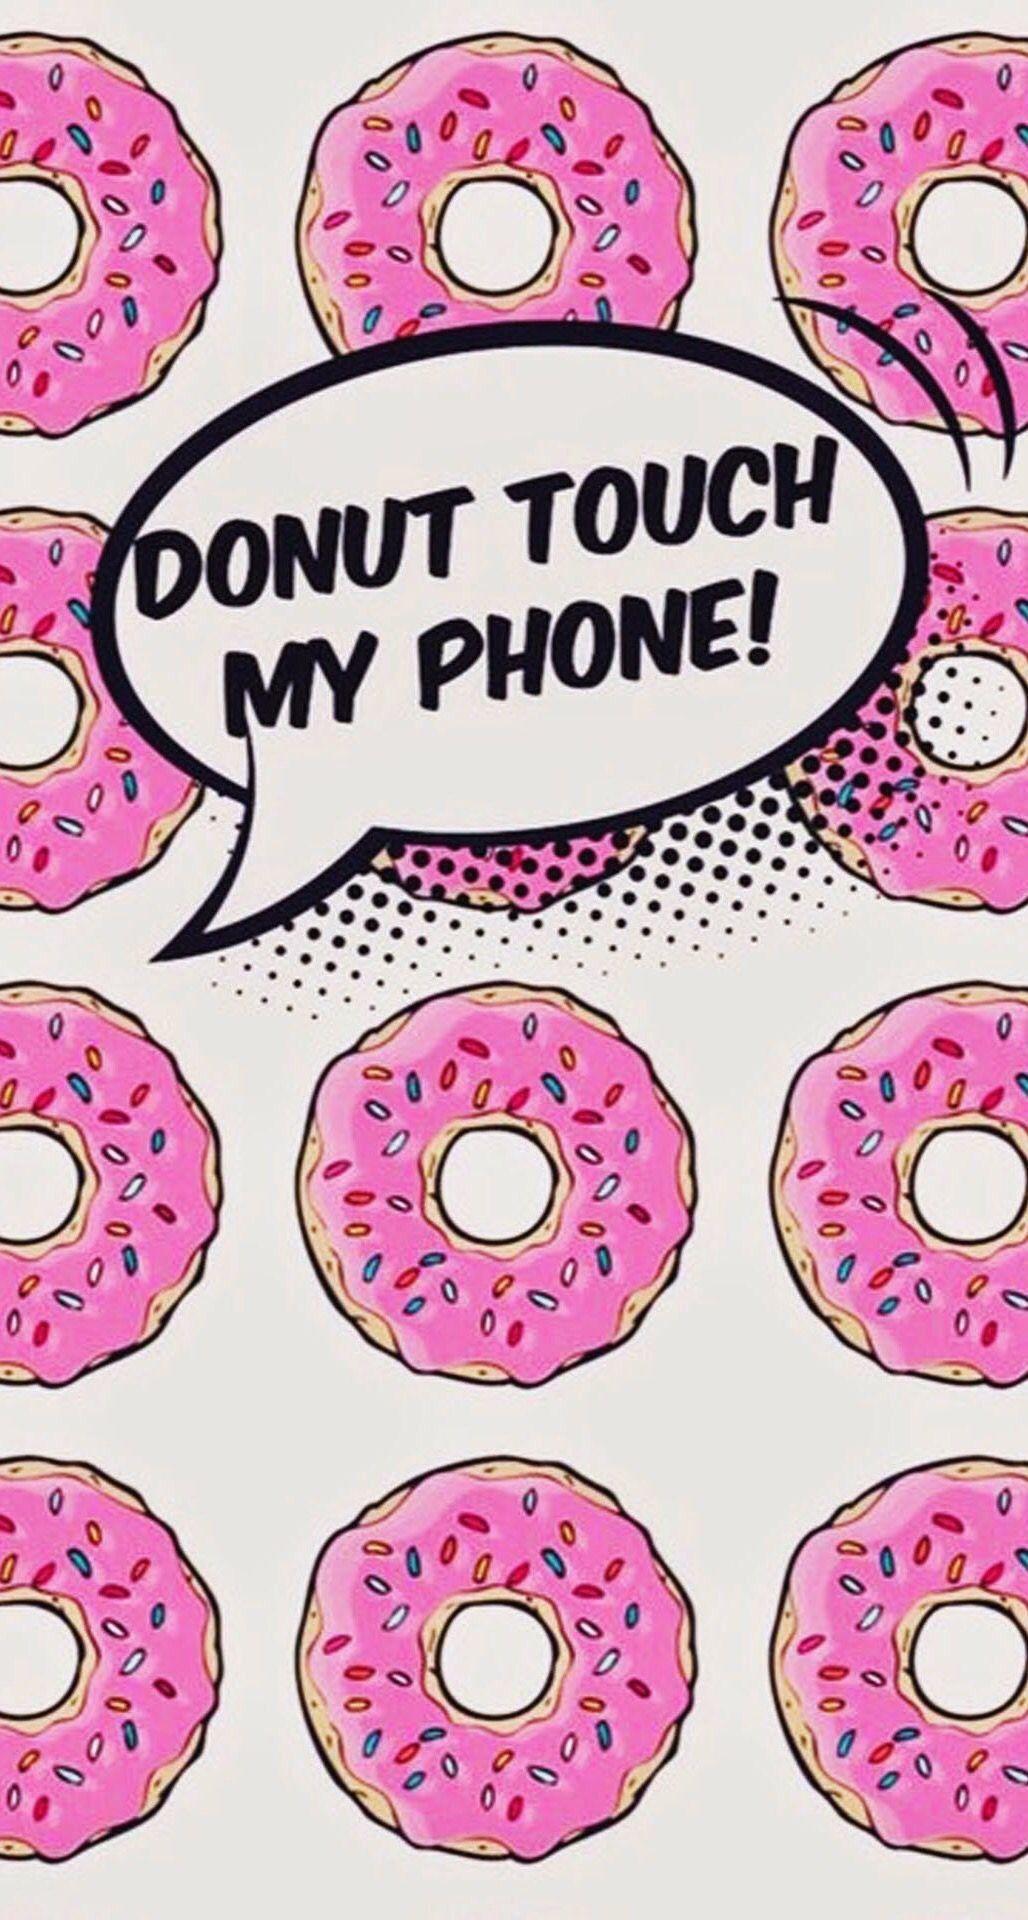 Hd Wallpaper for Laptop Tumblr Inspirational Donut touch My Phone